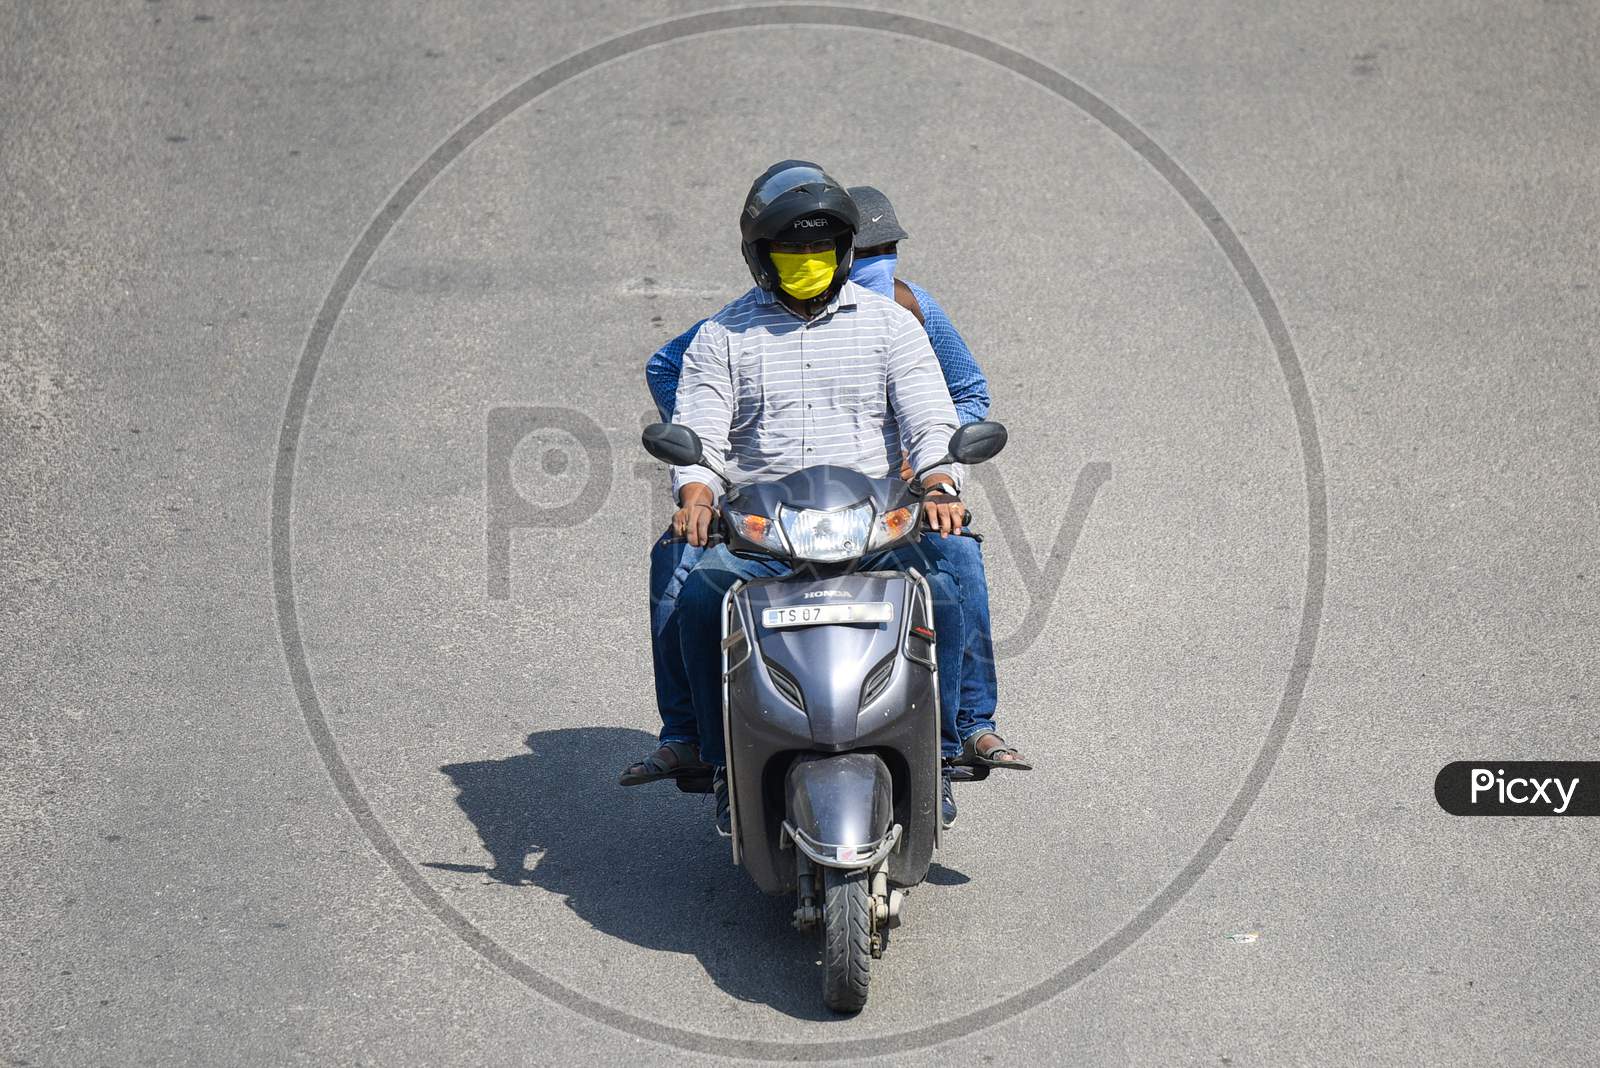 A man drives his two wheeler wearing a Face Mask amid Novel Corona Virus Outbreak in Hyderabad, COVID-19